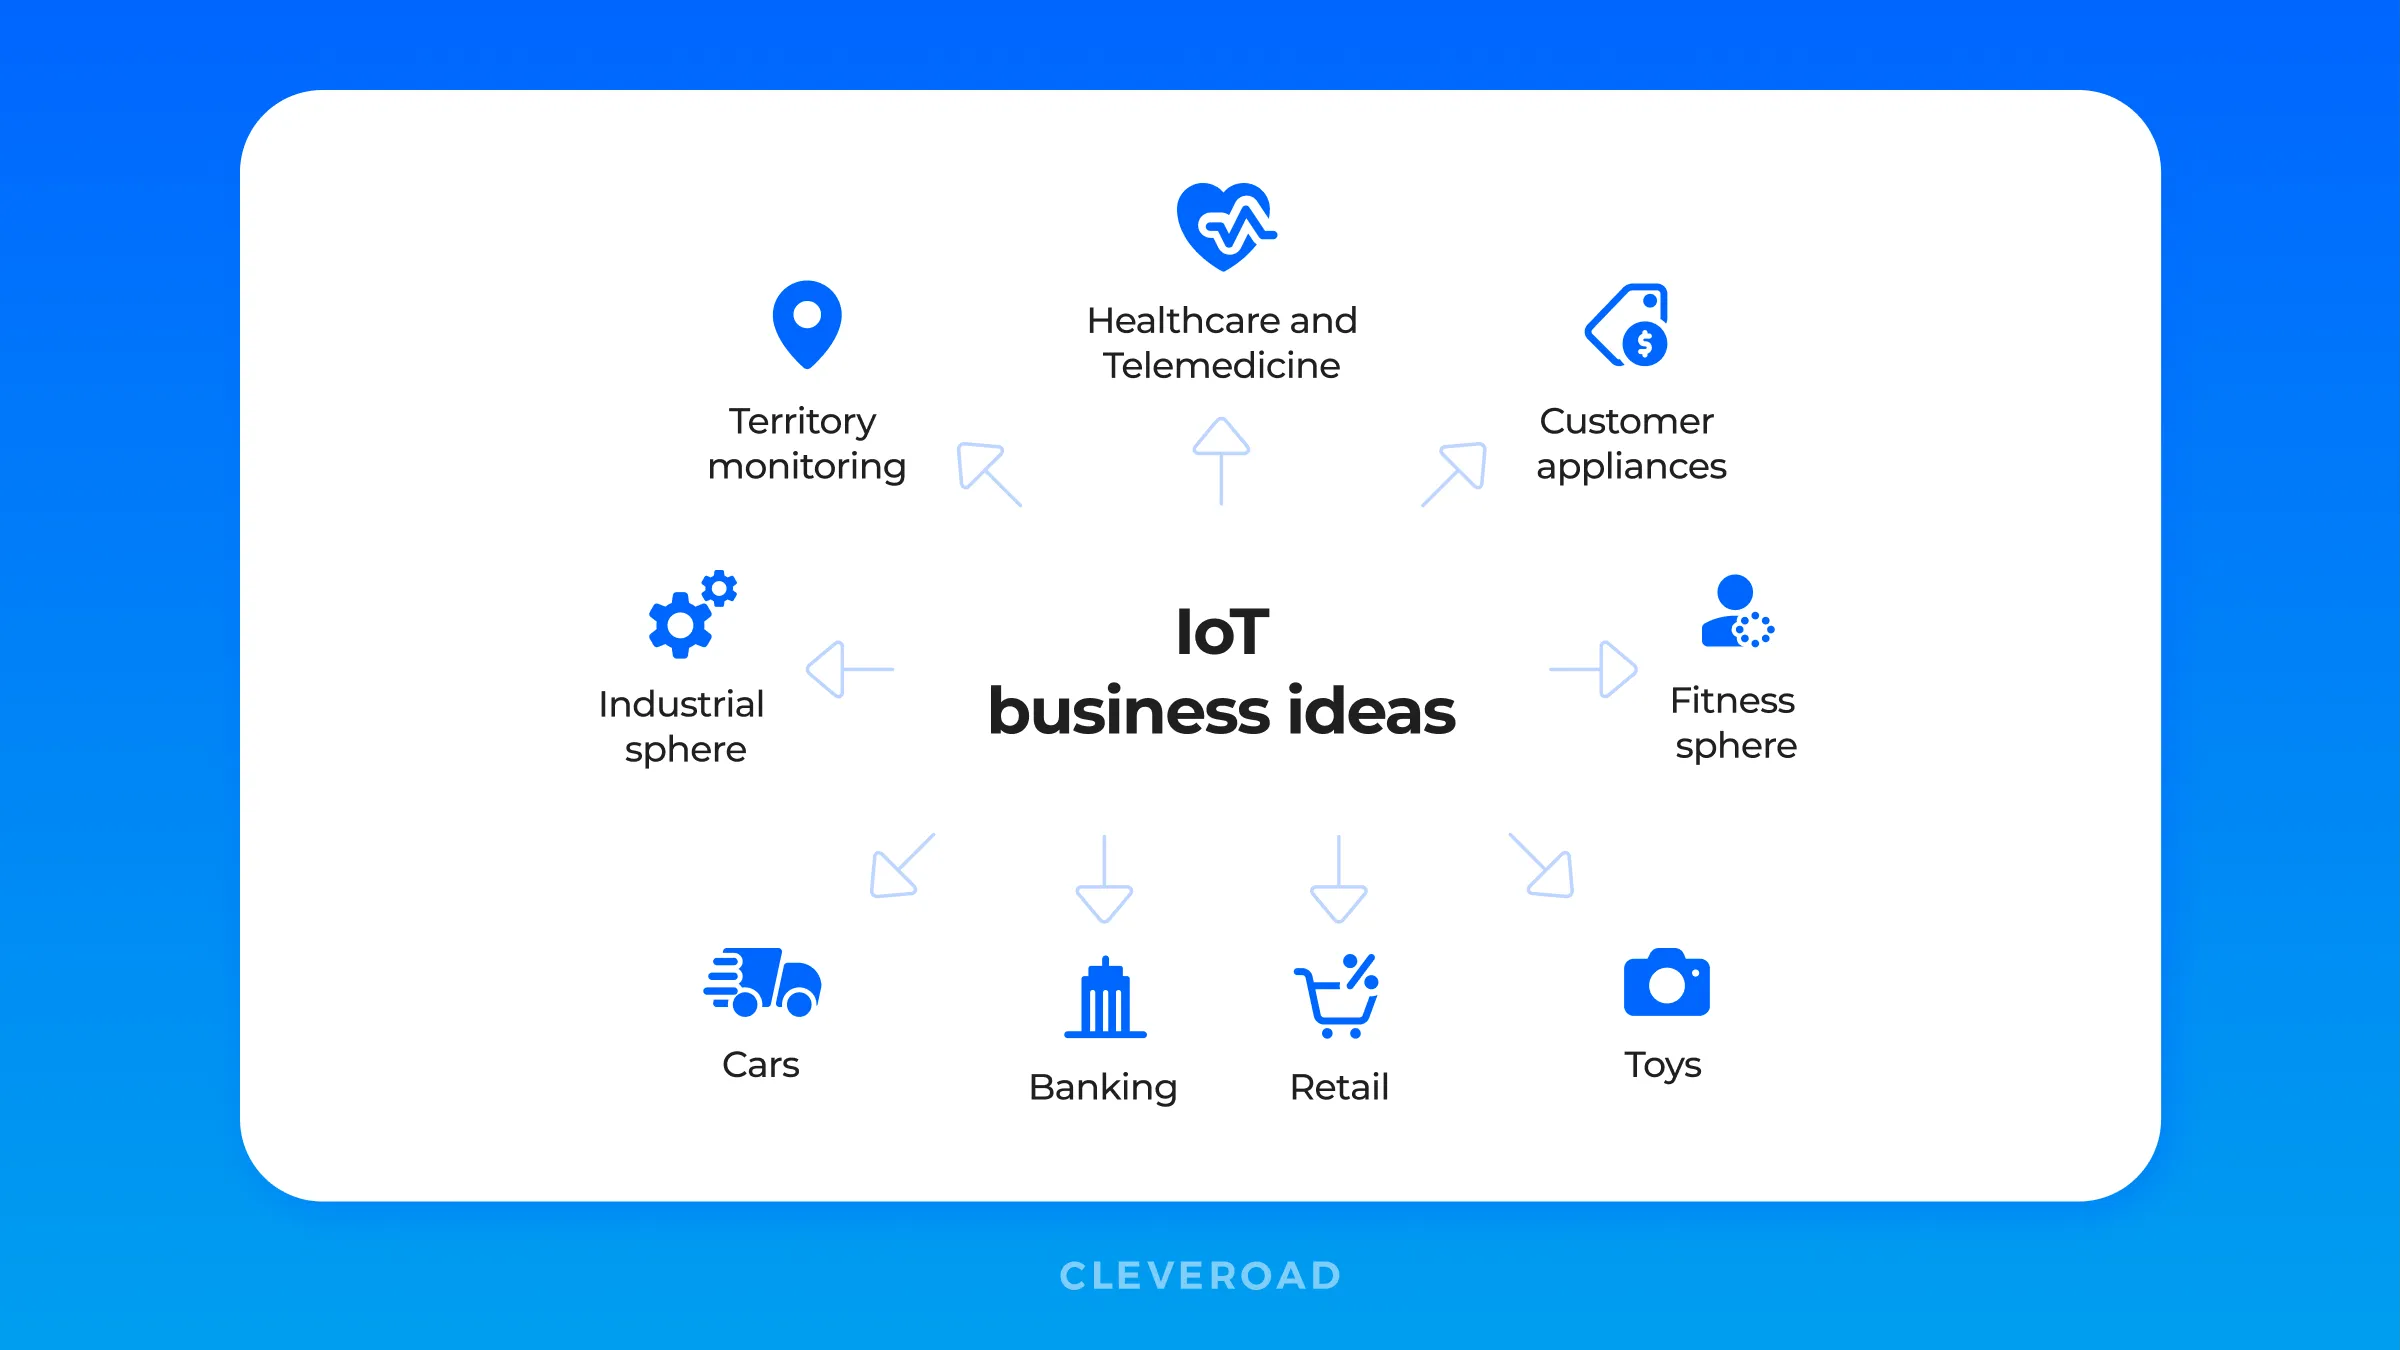 Business ideas or IoT